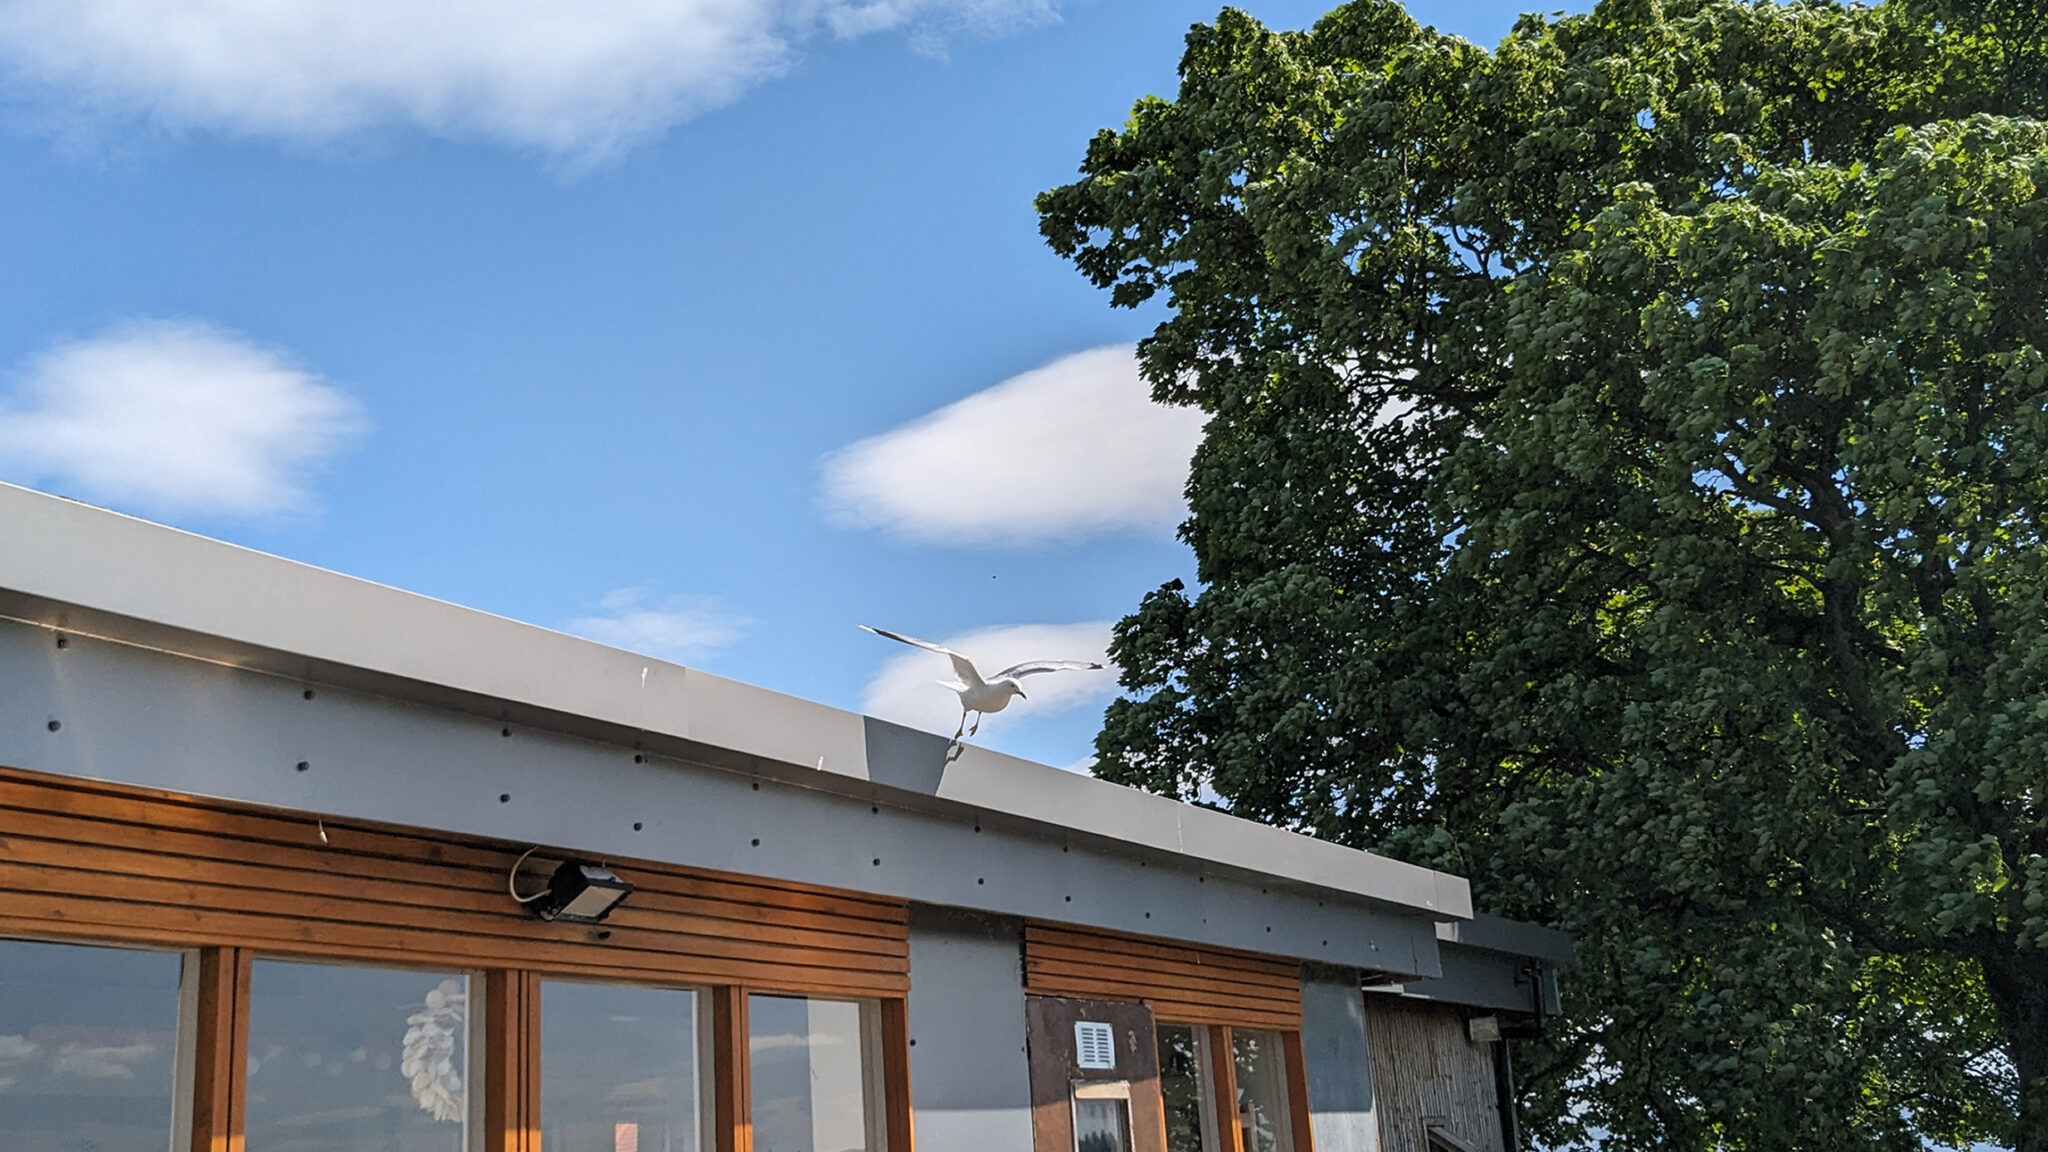 A seagull leaping from the roof of The Beachcomber Cafe beneath a cloudy blue sky and leafy green trees.